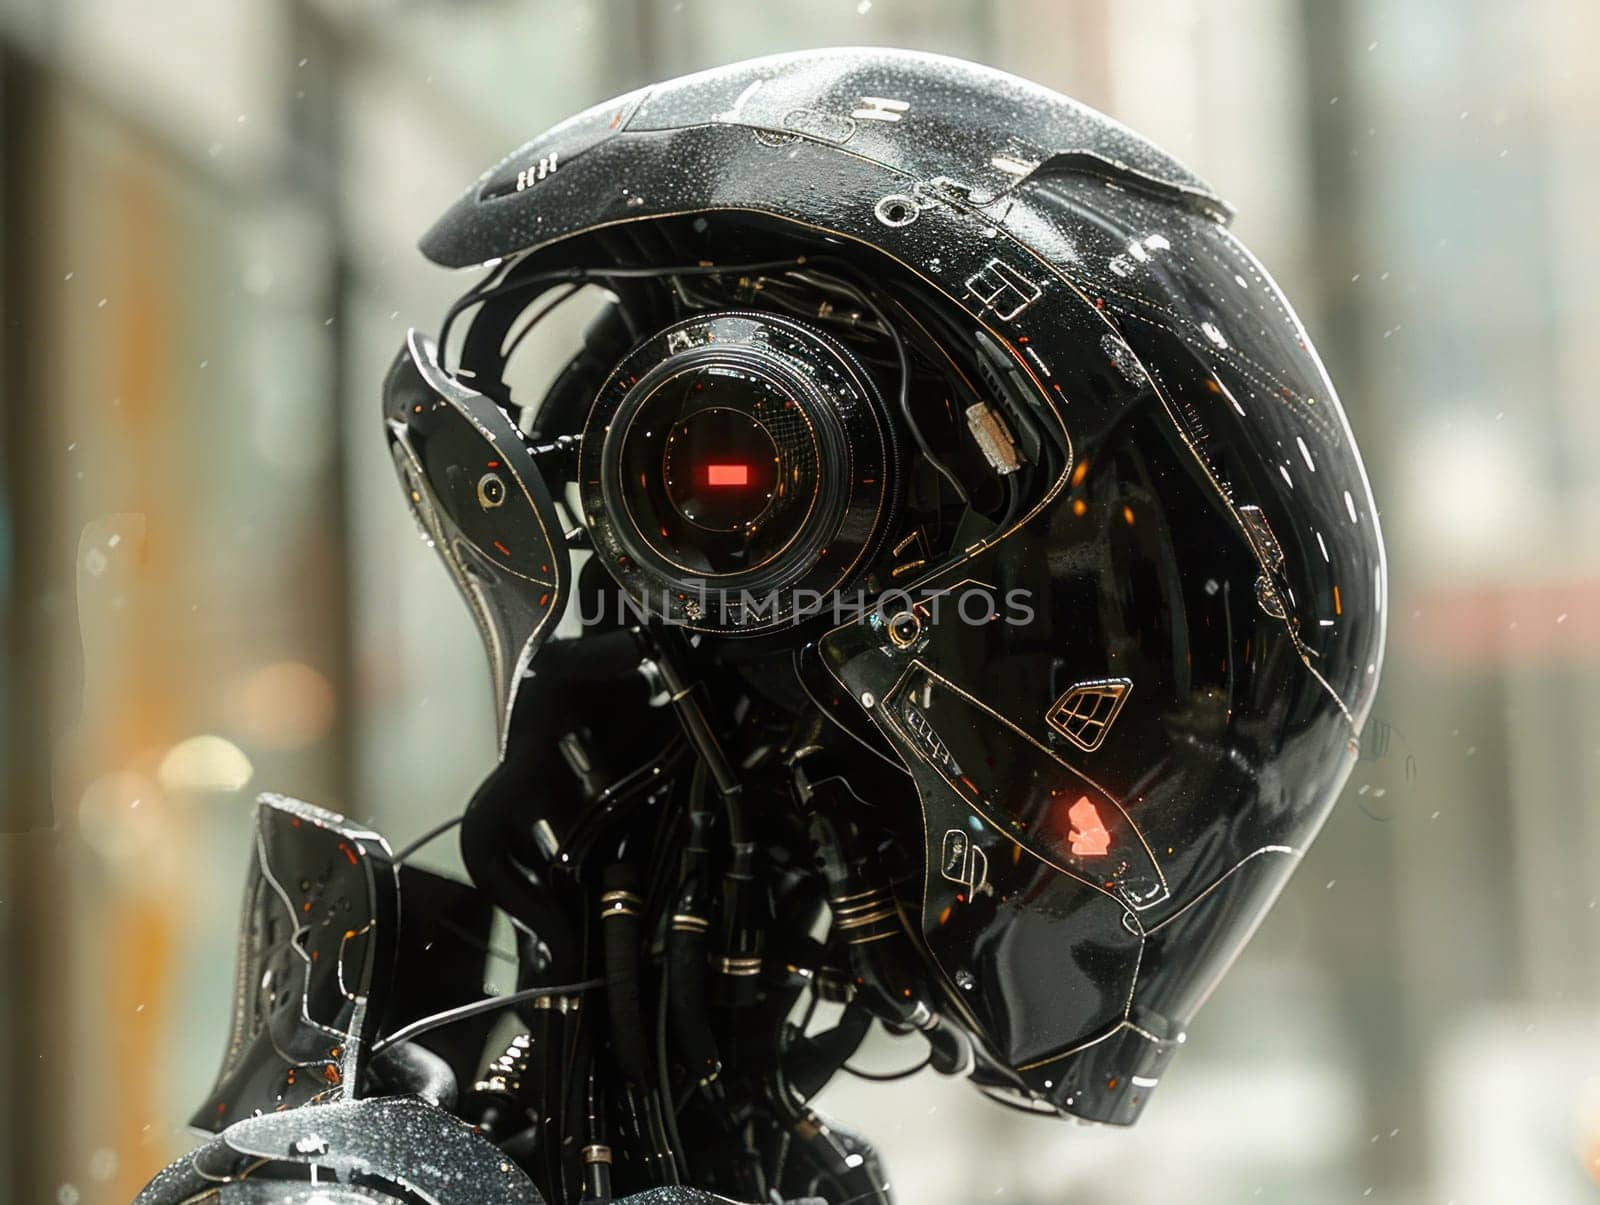 Robot Wearing Helmet Up Close by but_photo